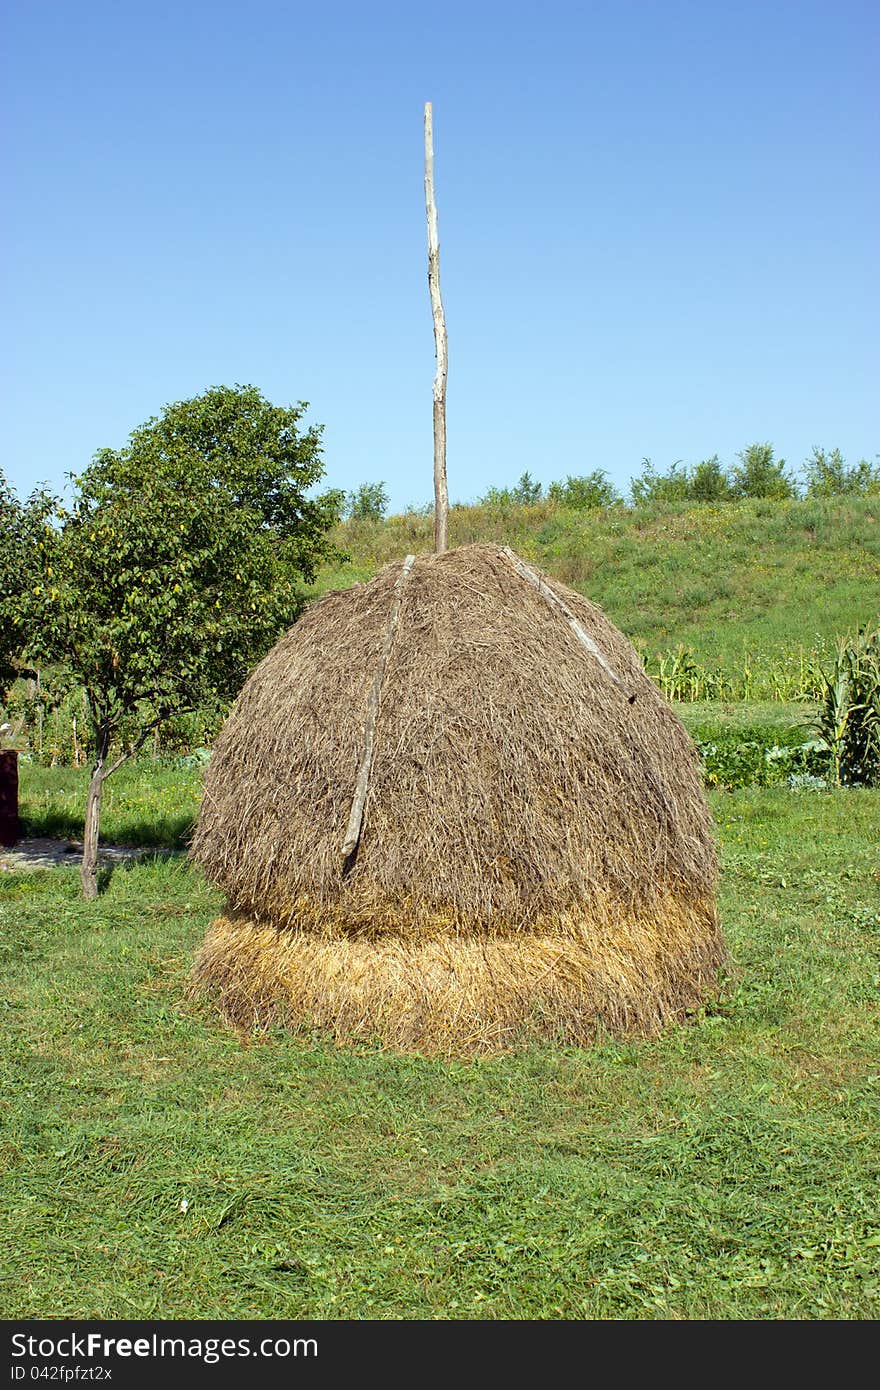 Haystack near the garden with vegetables